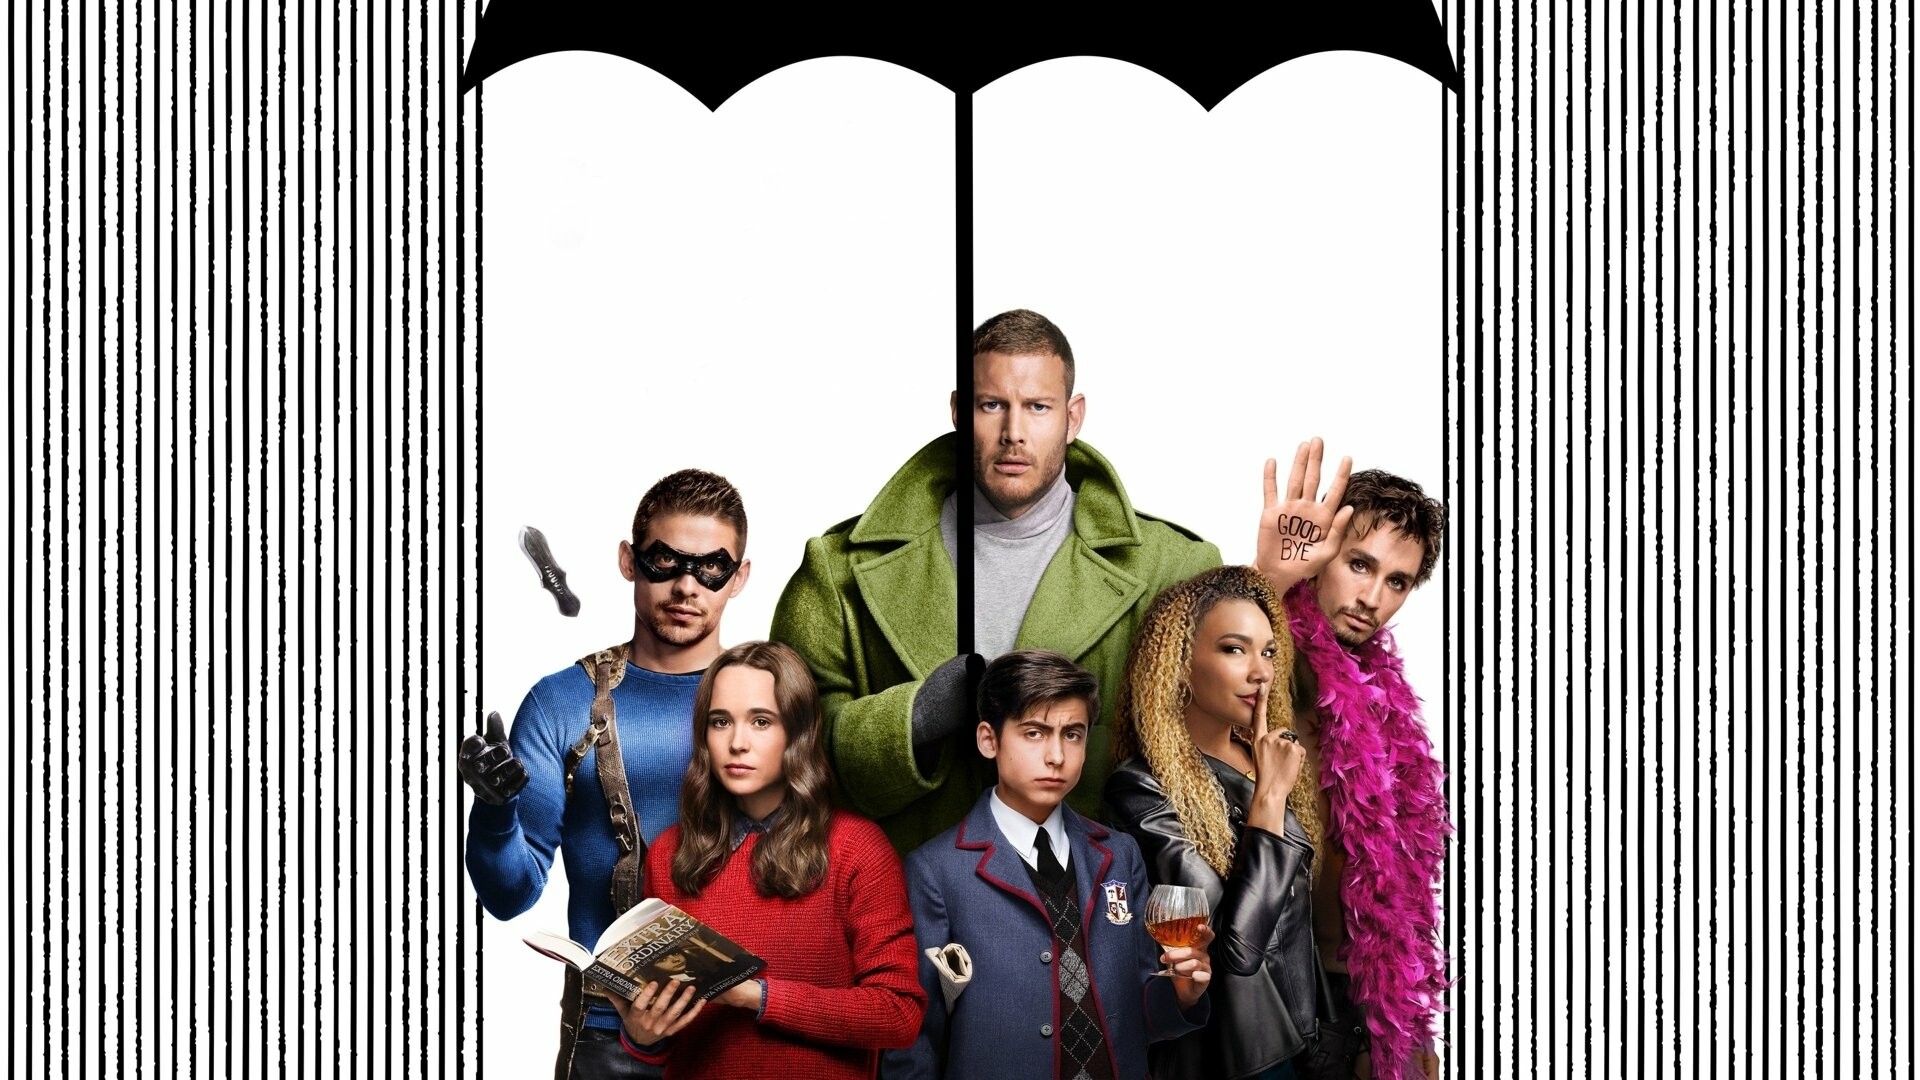 The Umbrella Academy: Six individuals with unique abilities or superpowers, raised by an eccentric millionaire Reginald Hargreeves. 1920x1080 Full HD Wallpaper.